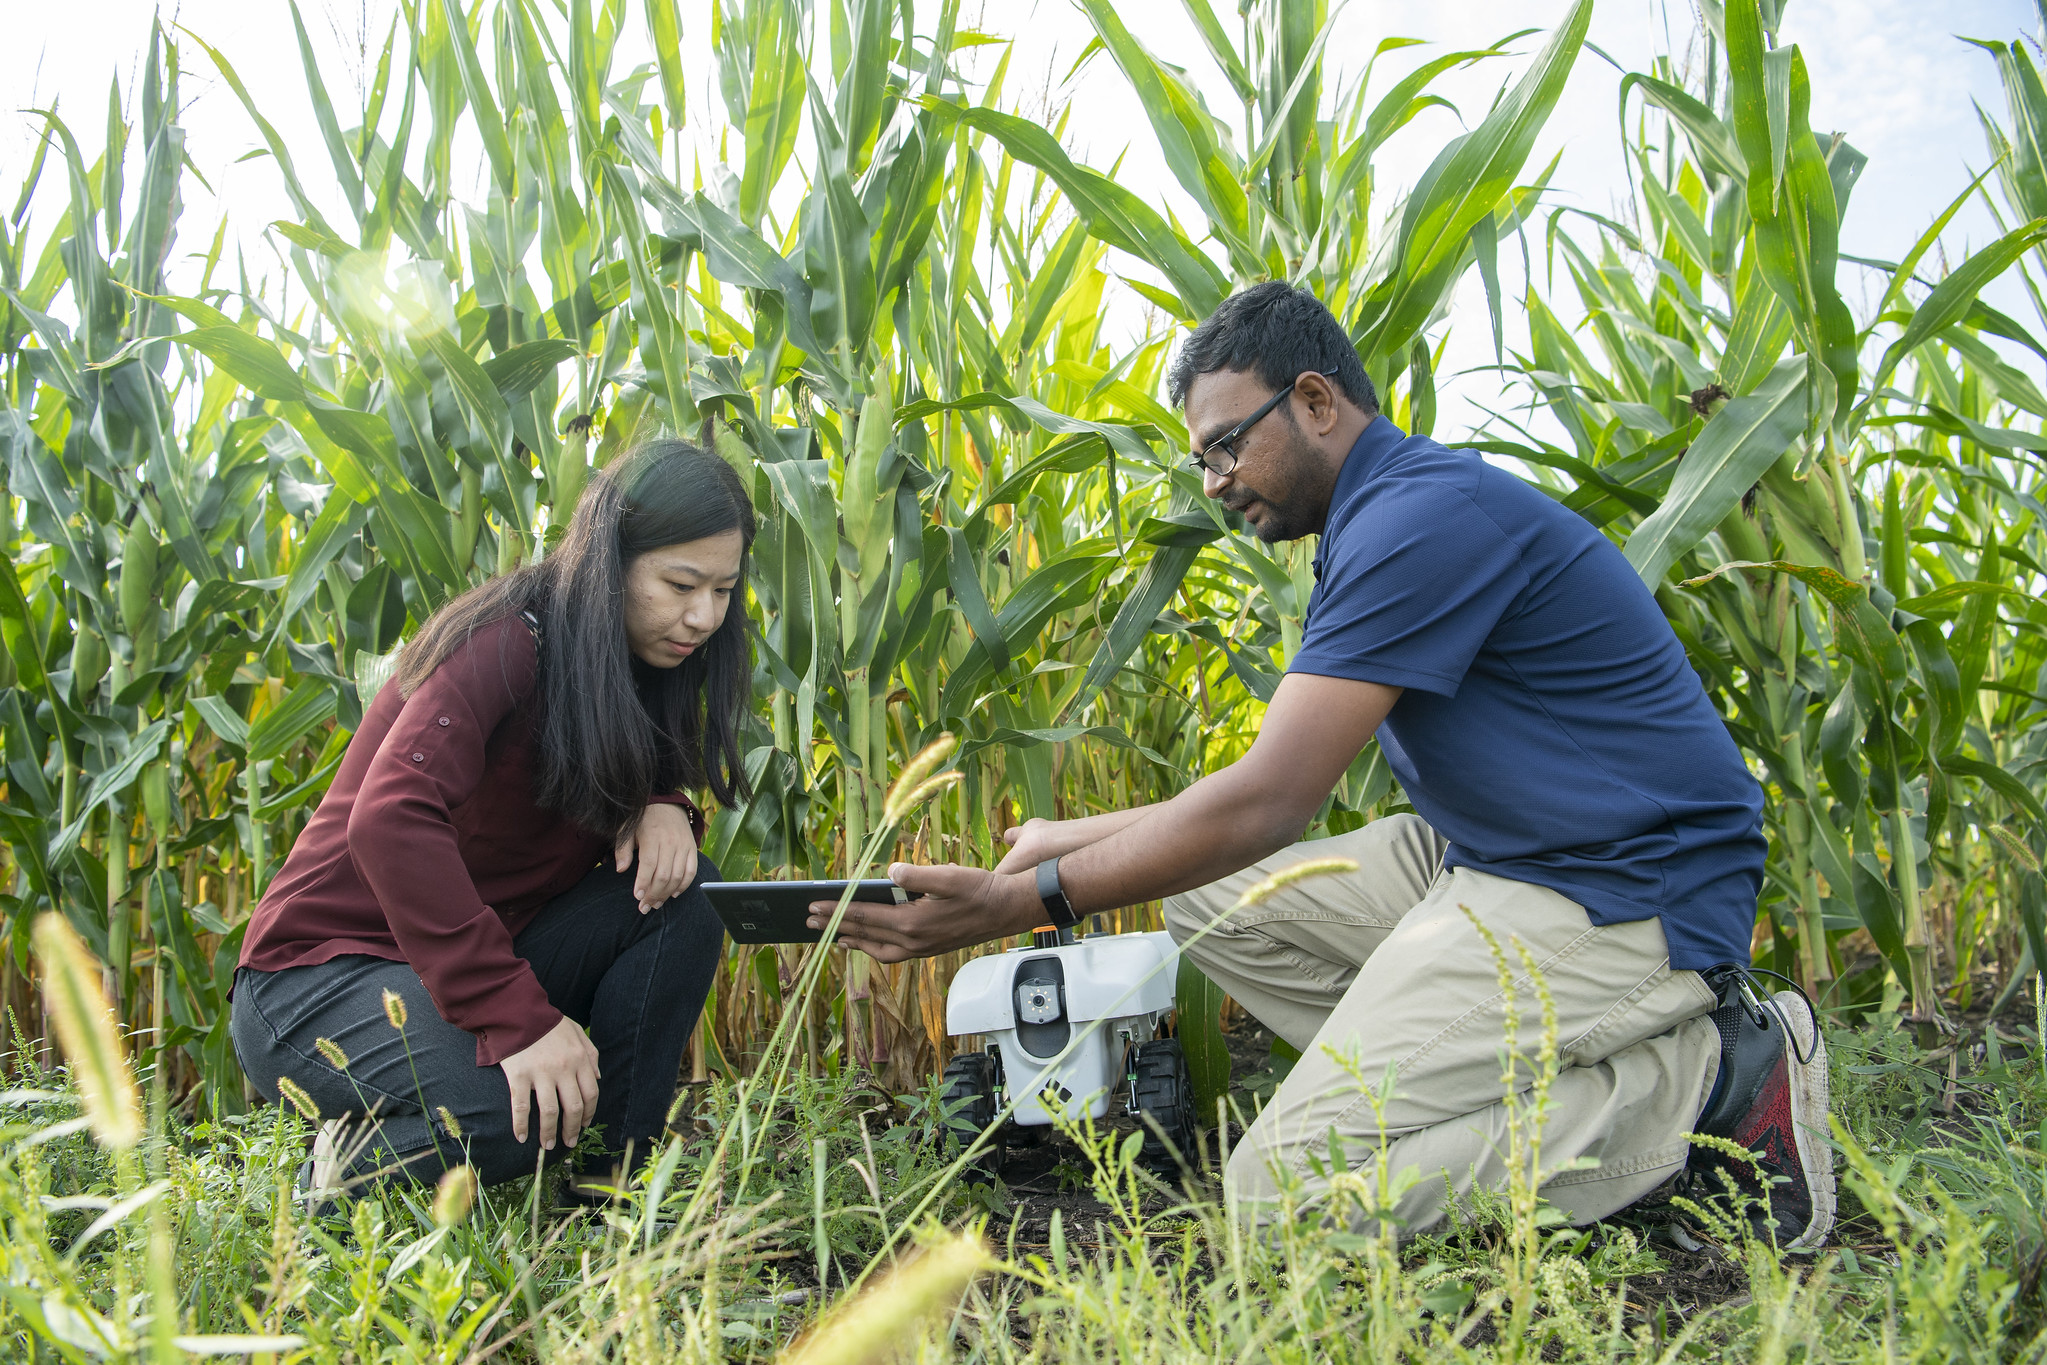 Students using a robot in corn field.